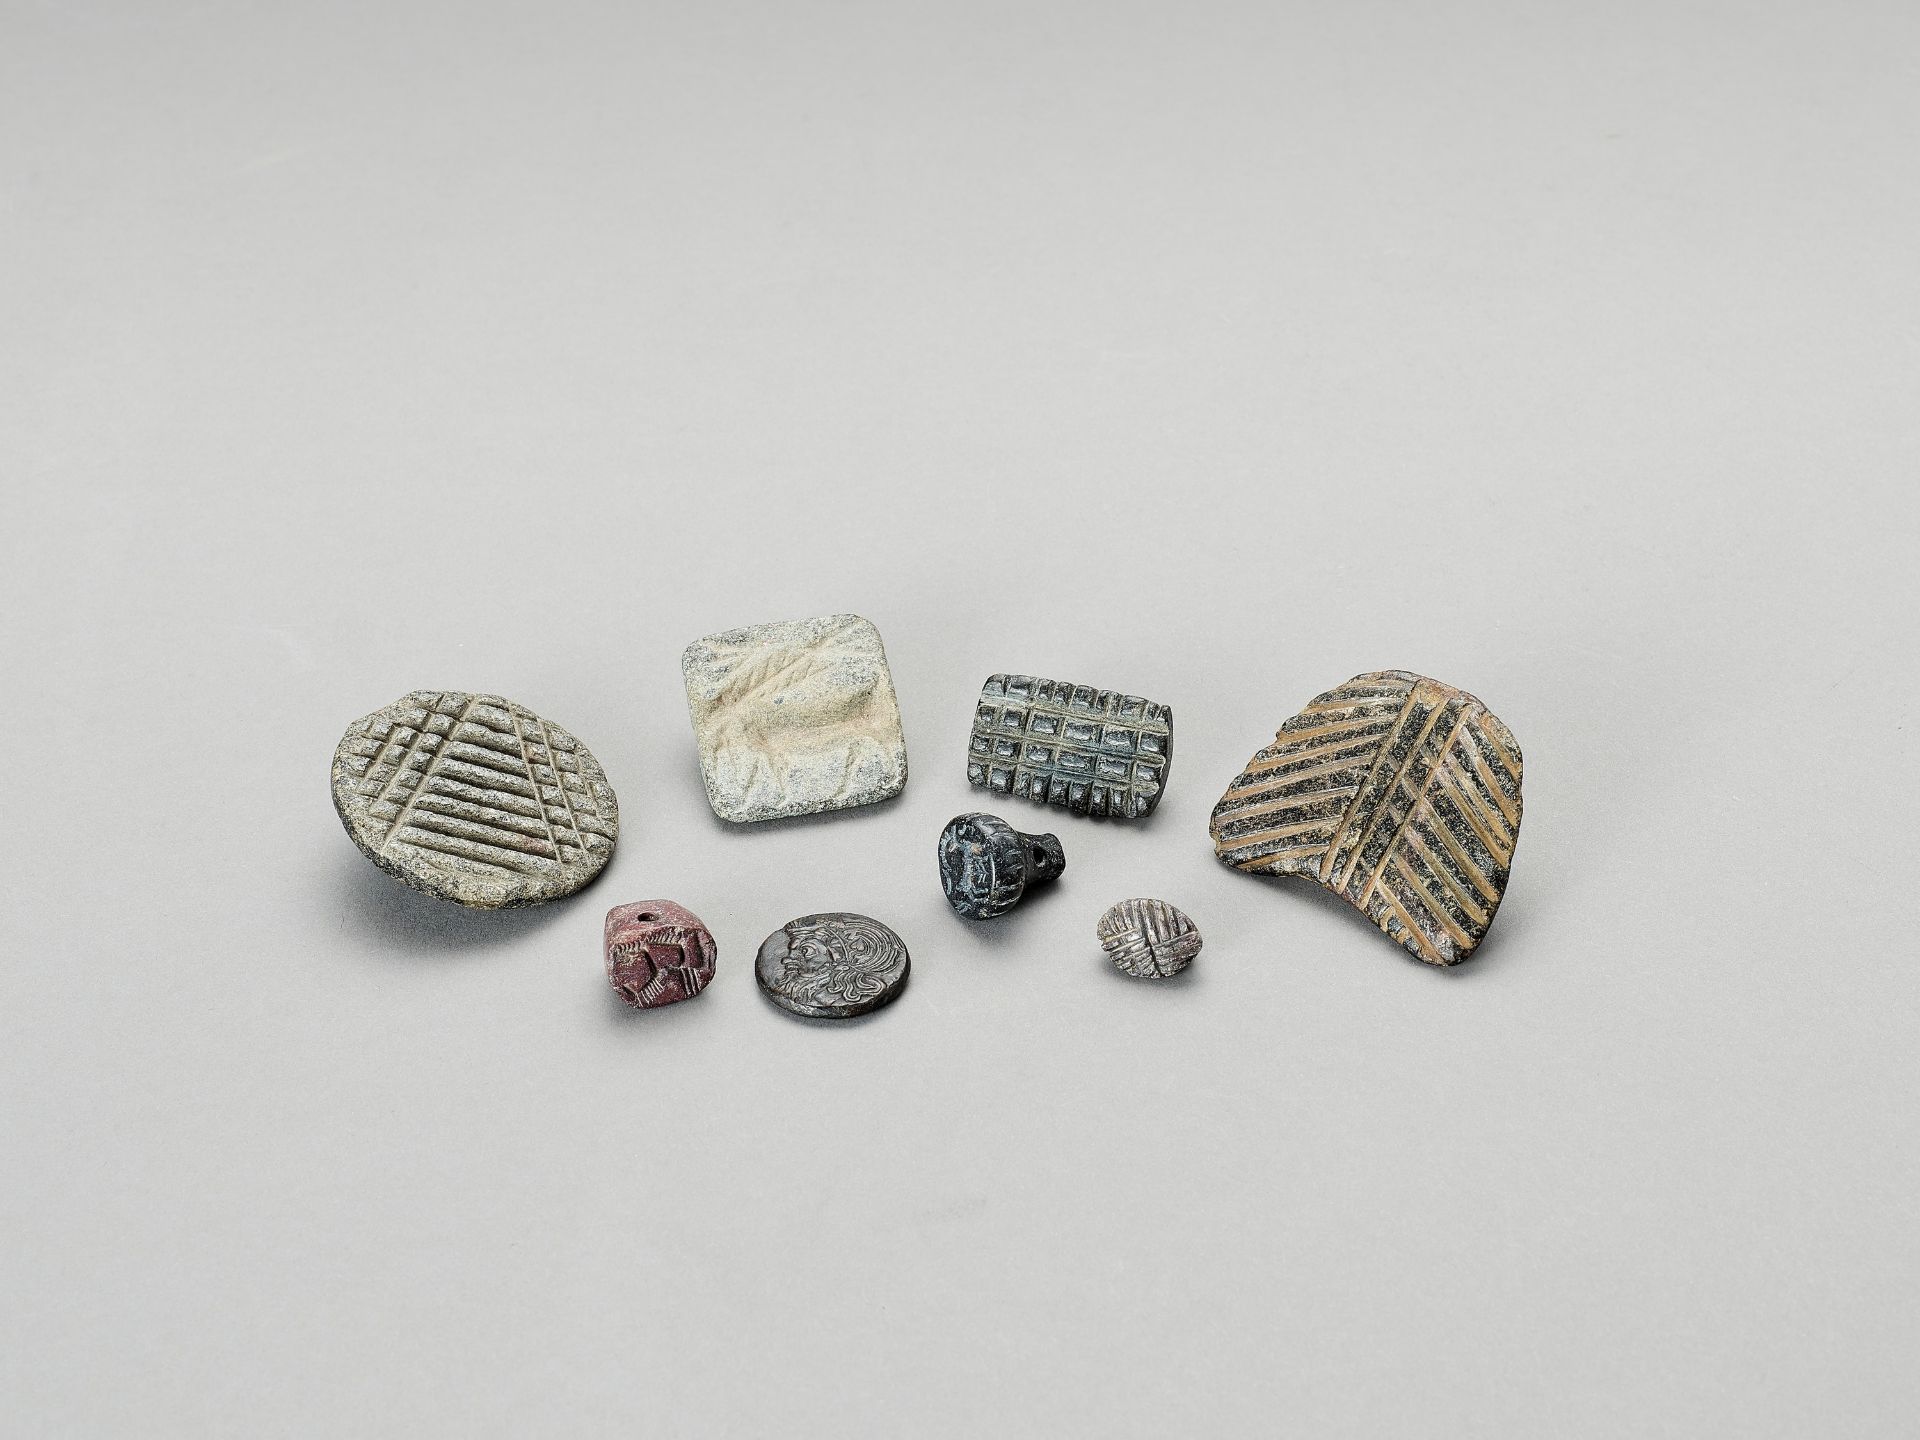 A MIXED LOT OF SEVEN NEAR EAST STONE SEALS AND A BRONZE PANTICAPAEUM COIN